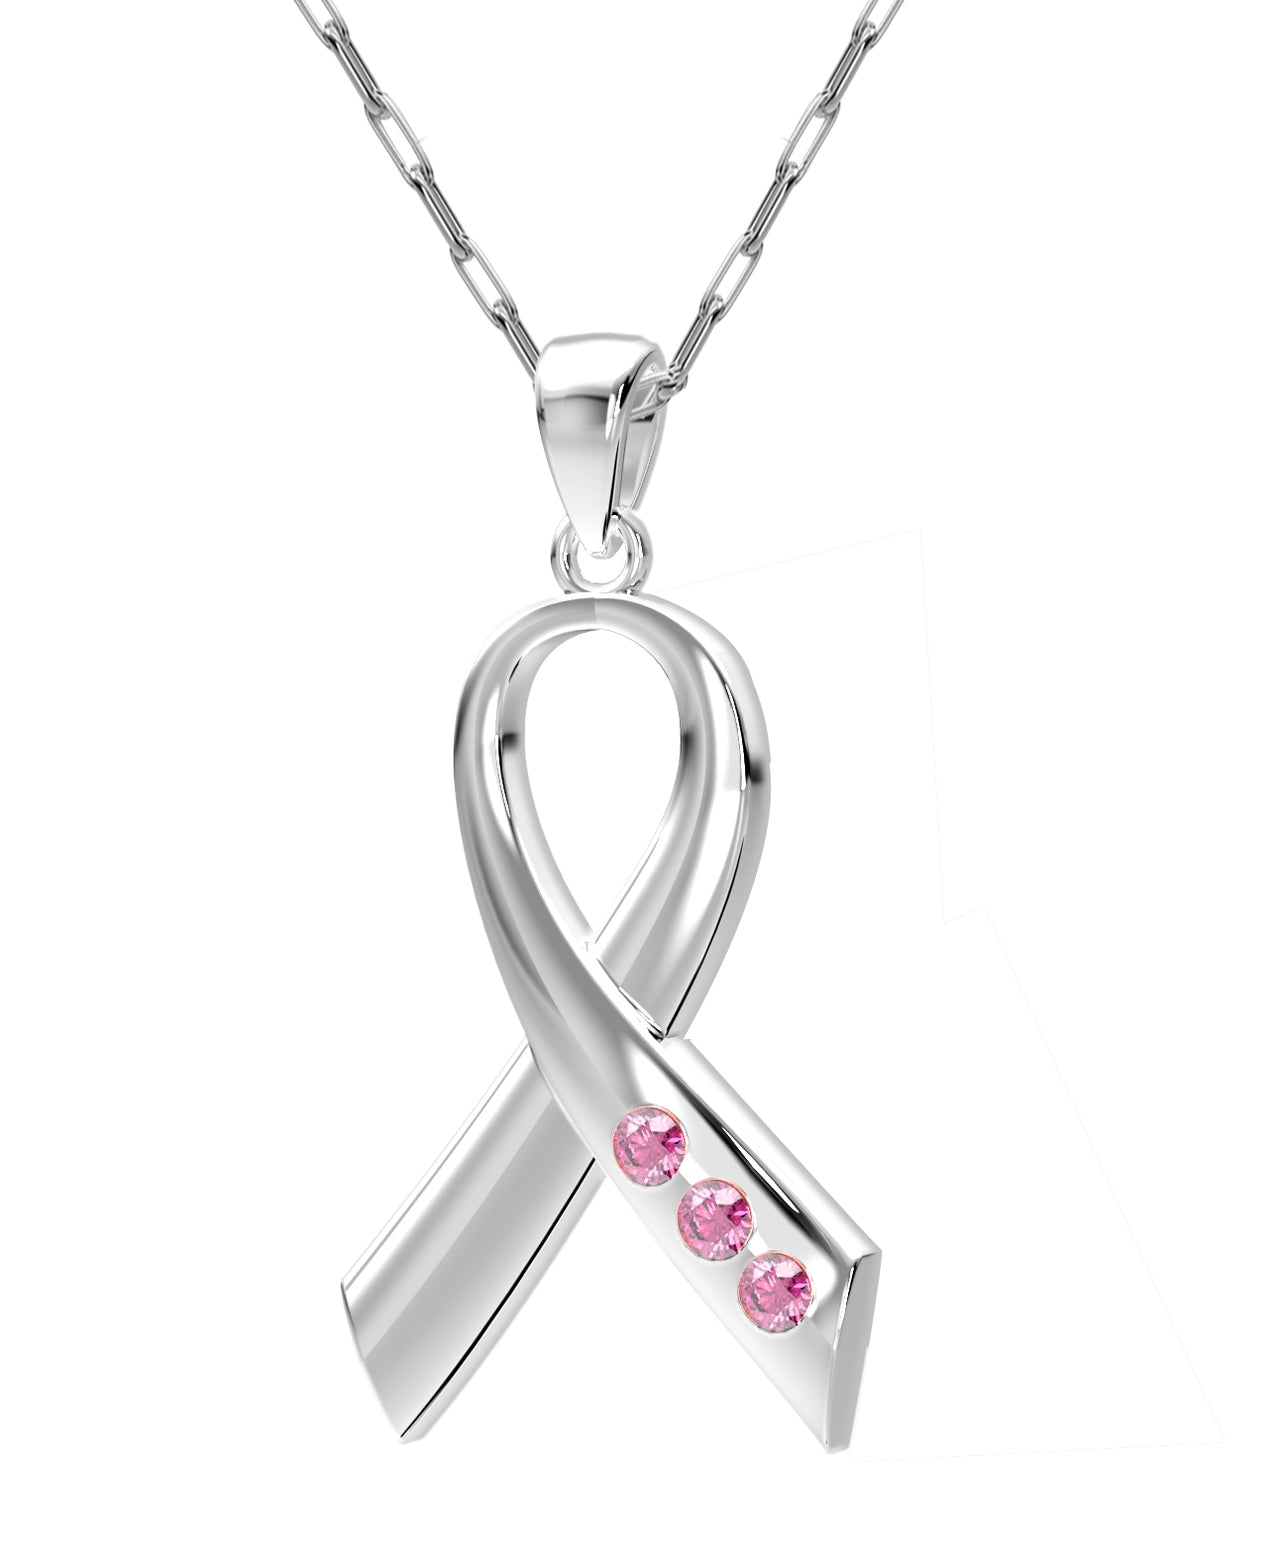 Personalized Ladies Sterling Silver Awareness Survival Cancer Ribbon Pendant Necklace with Optional Gemstone